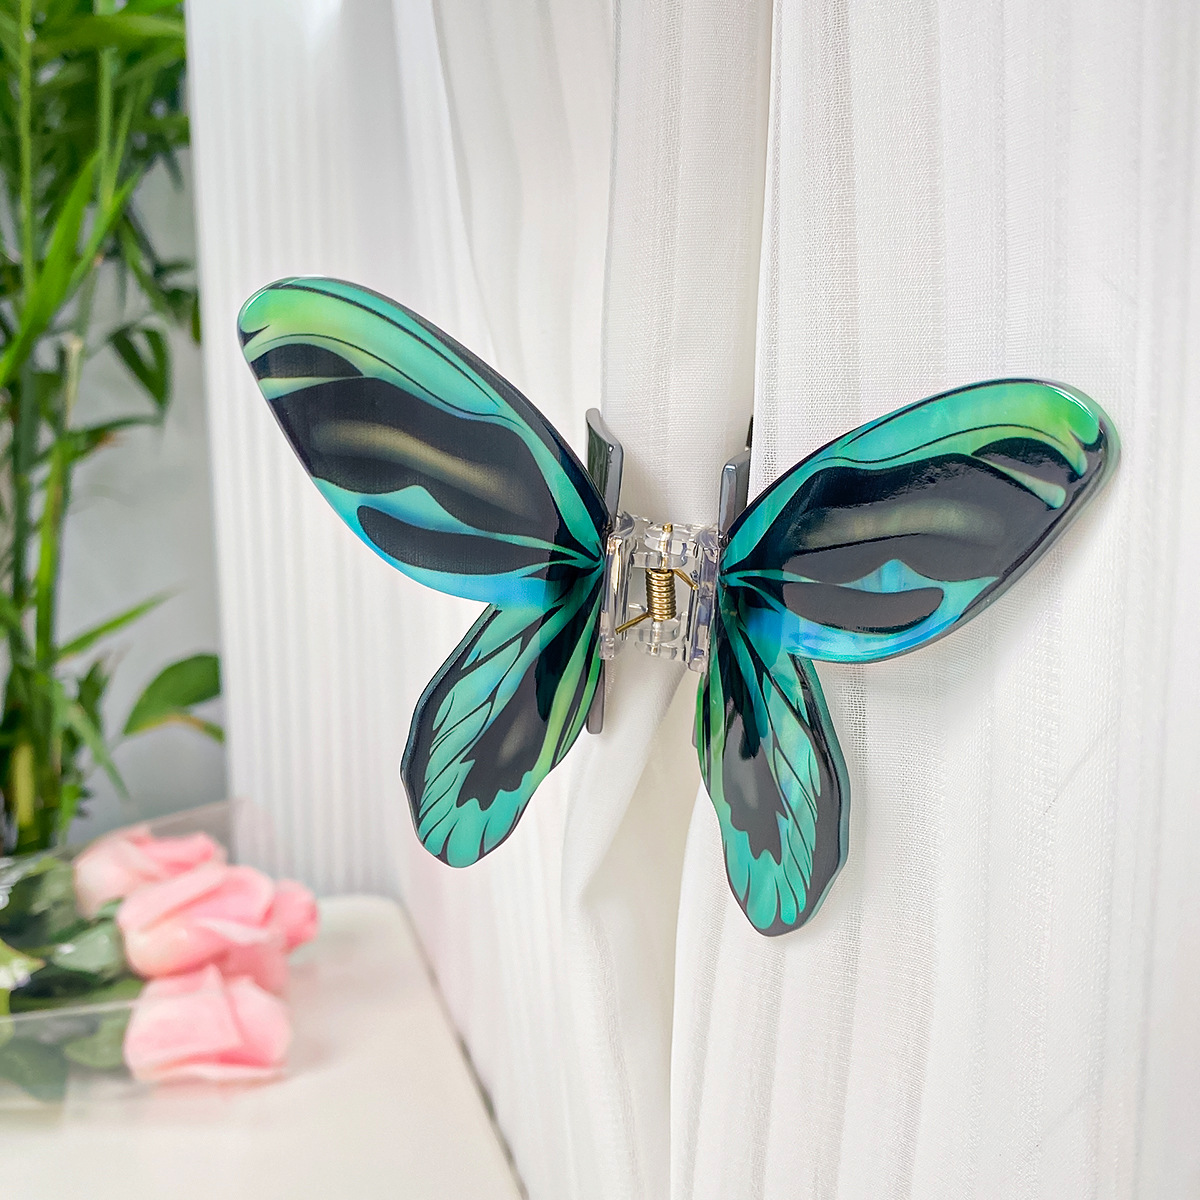 Blue and green Morpho butterfly